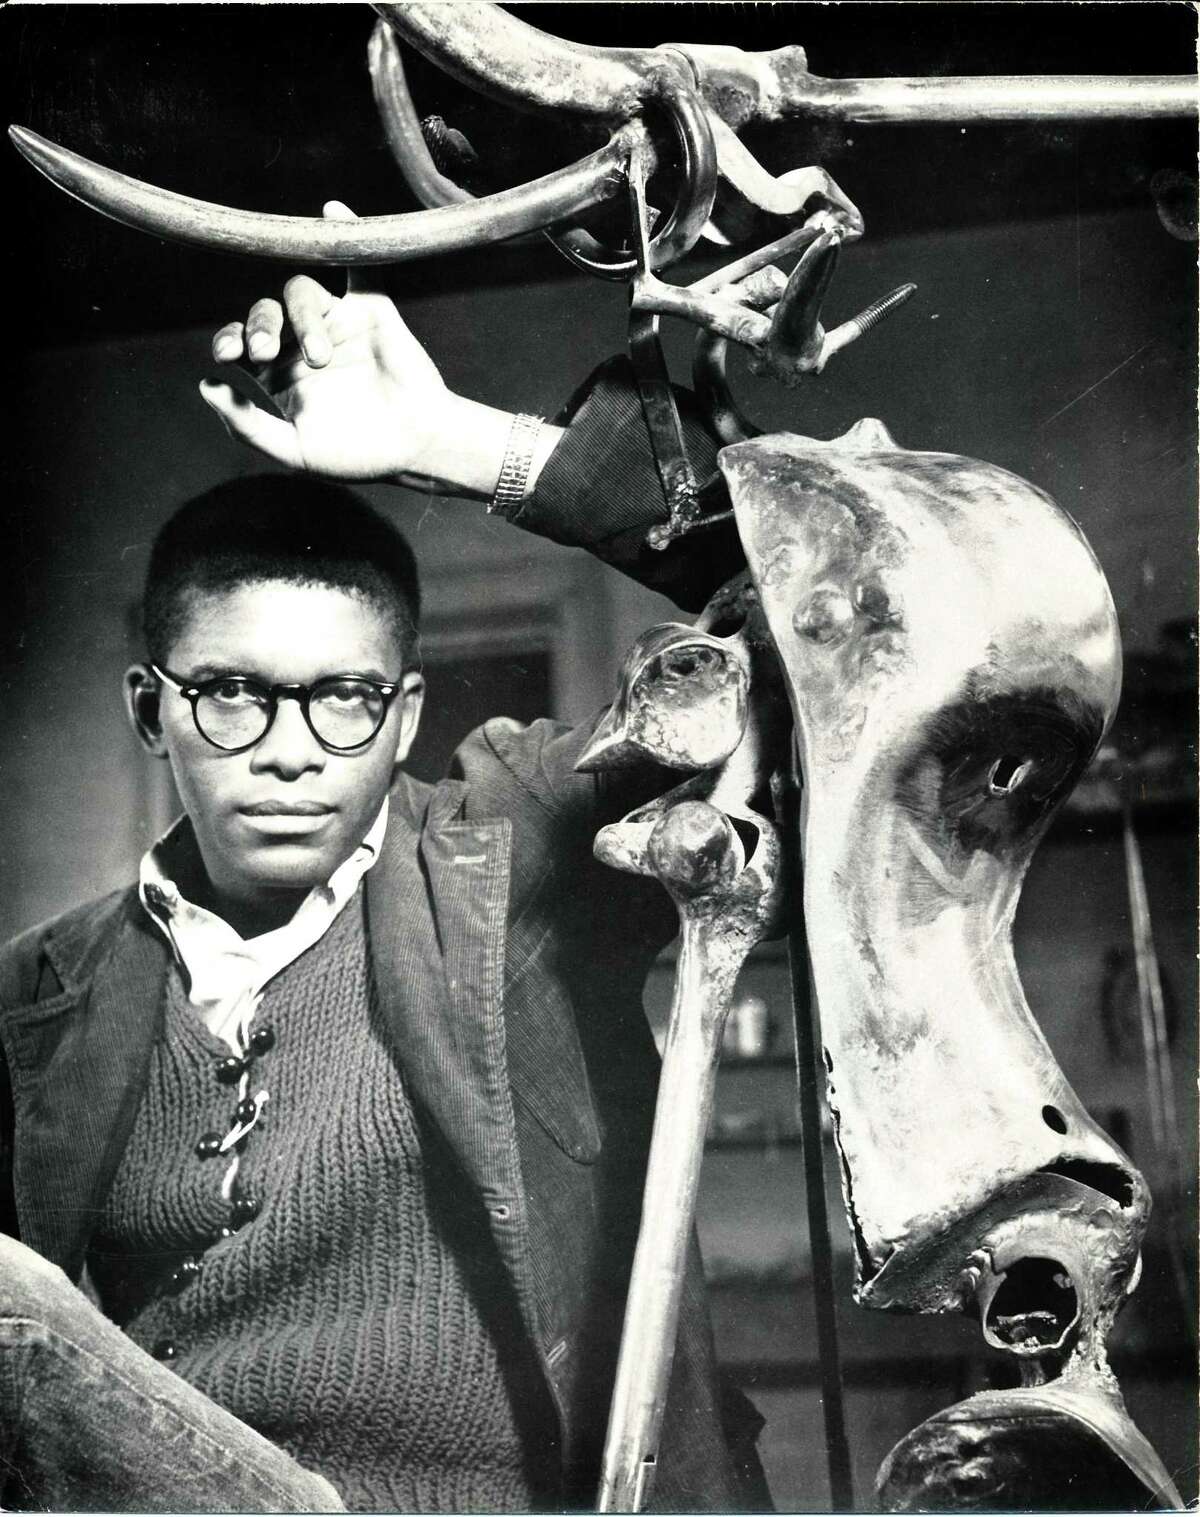 This photo by noted photographer and textile artist Martha Mood shows Richard Hunt posing with a work he titled “Longhorn” at the Mills Race Studio in about 1960, decades after sculptor Gutzon Borglum used the studio in the 1920s and '30 to develop prototypes for Mount Rushmore. Hunt, then in his mid-20s, went on to become a prolific sculptor who broke many social and cultural barriers as a Black artist. He said he was embraced by San Antonio's arts community while serving as an Army medic at Fort Sam Houston.